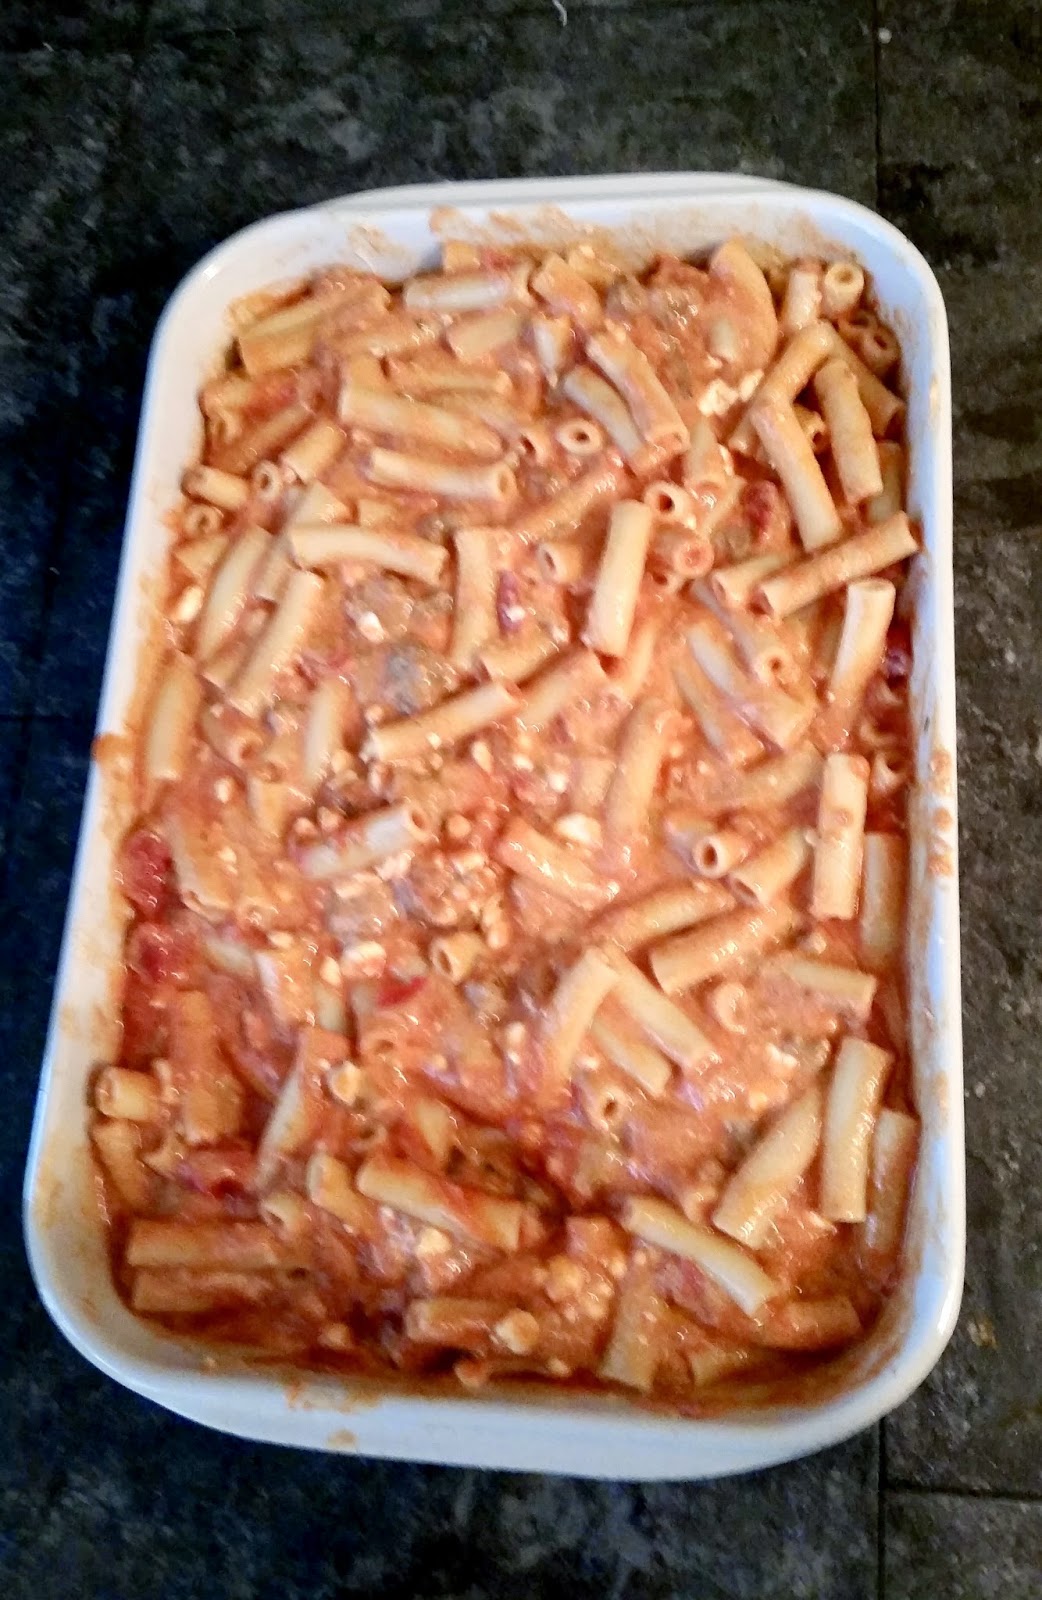 Sausage & Pepperoni baked Ziti : A New Family Favorite! Perfect kid-friendly and crowd-pleasing dish! #FamilyFavorites #shop